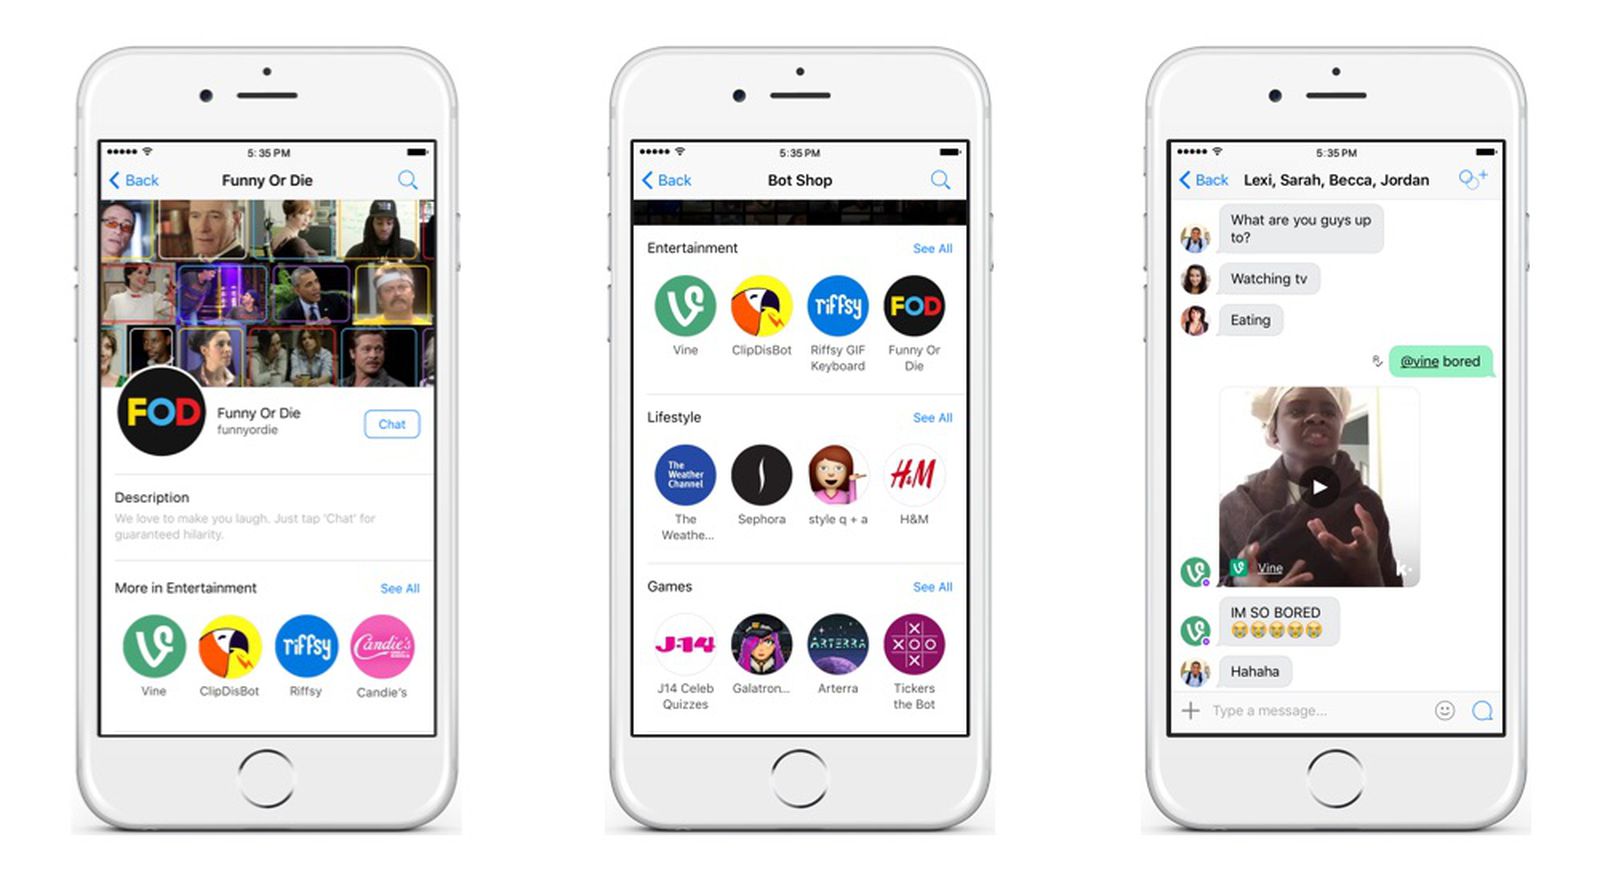 Kik Messenger app updated for iOS 7 with new design, stickers and more